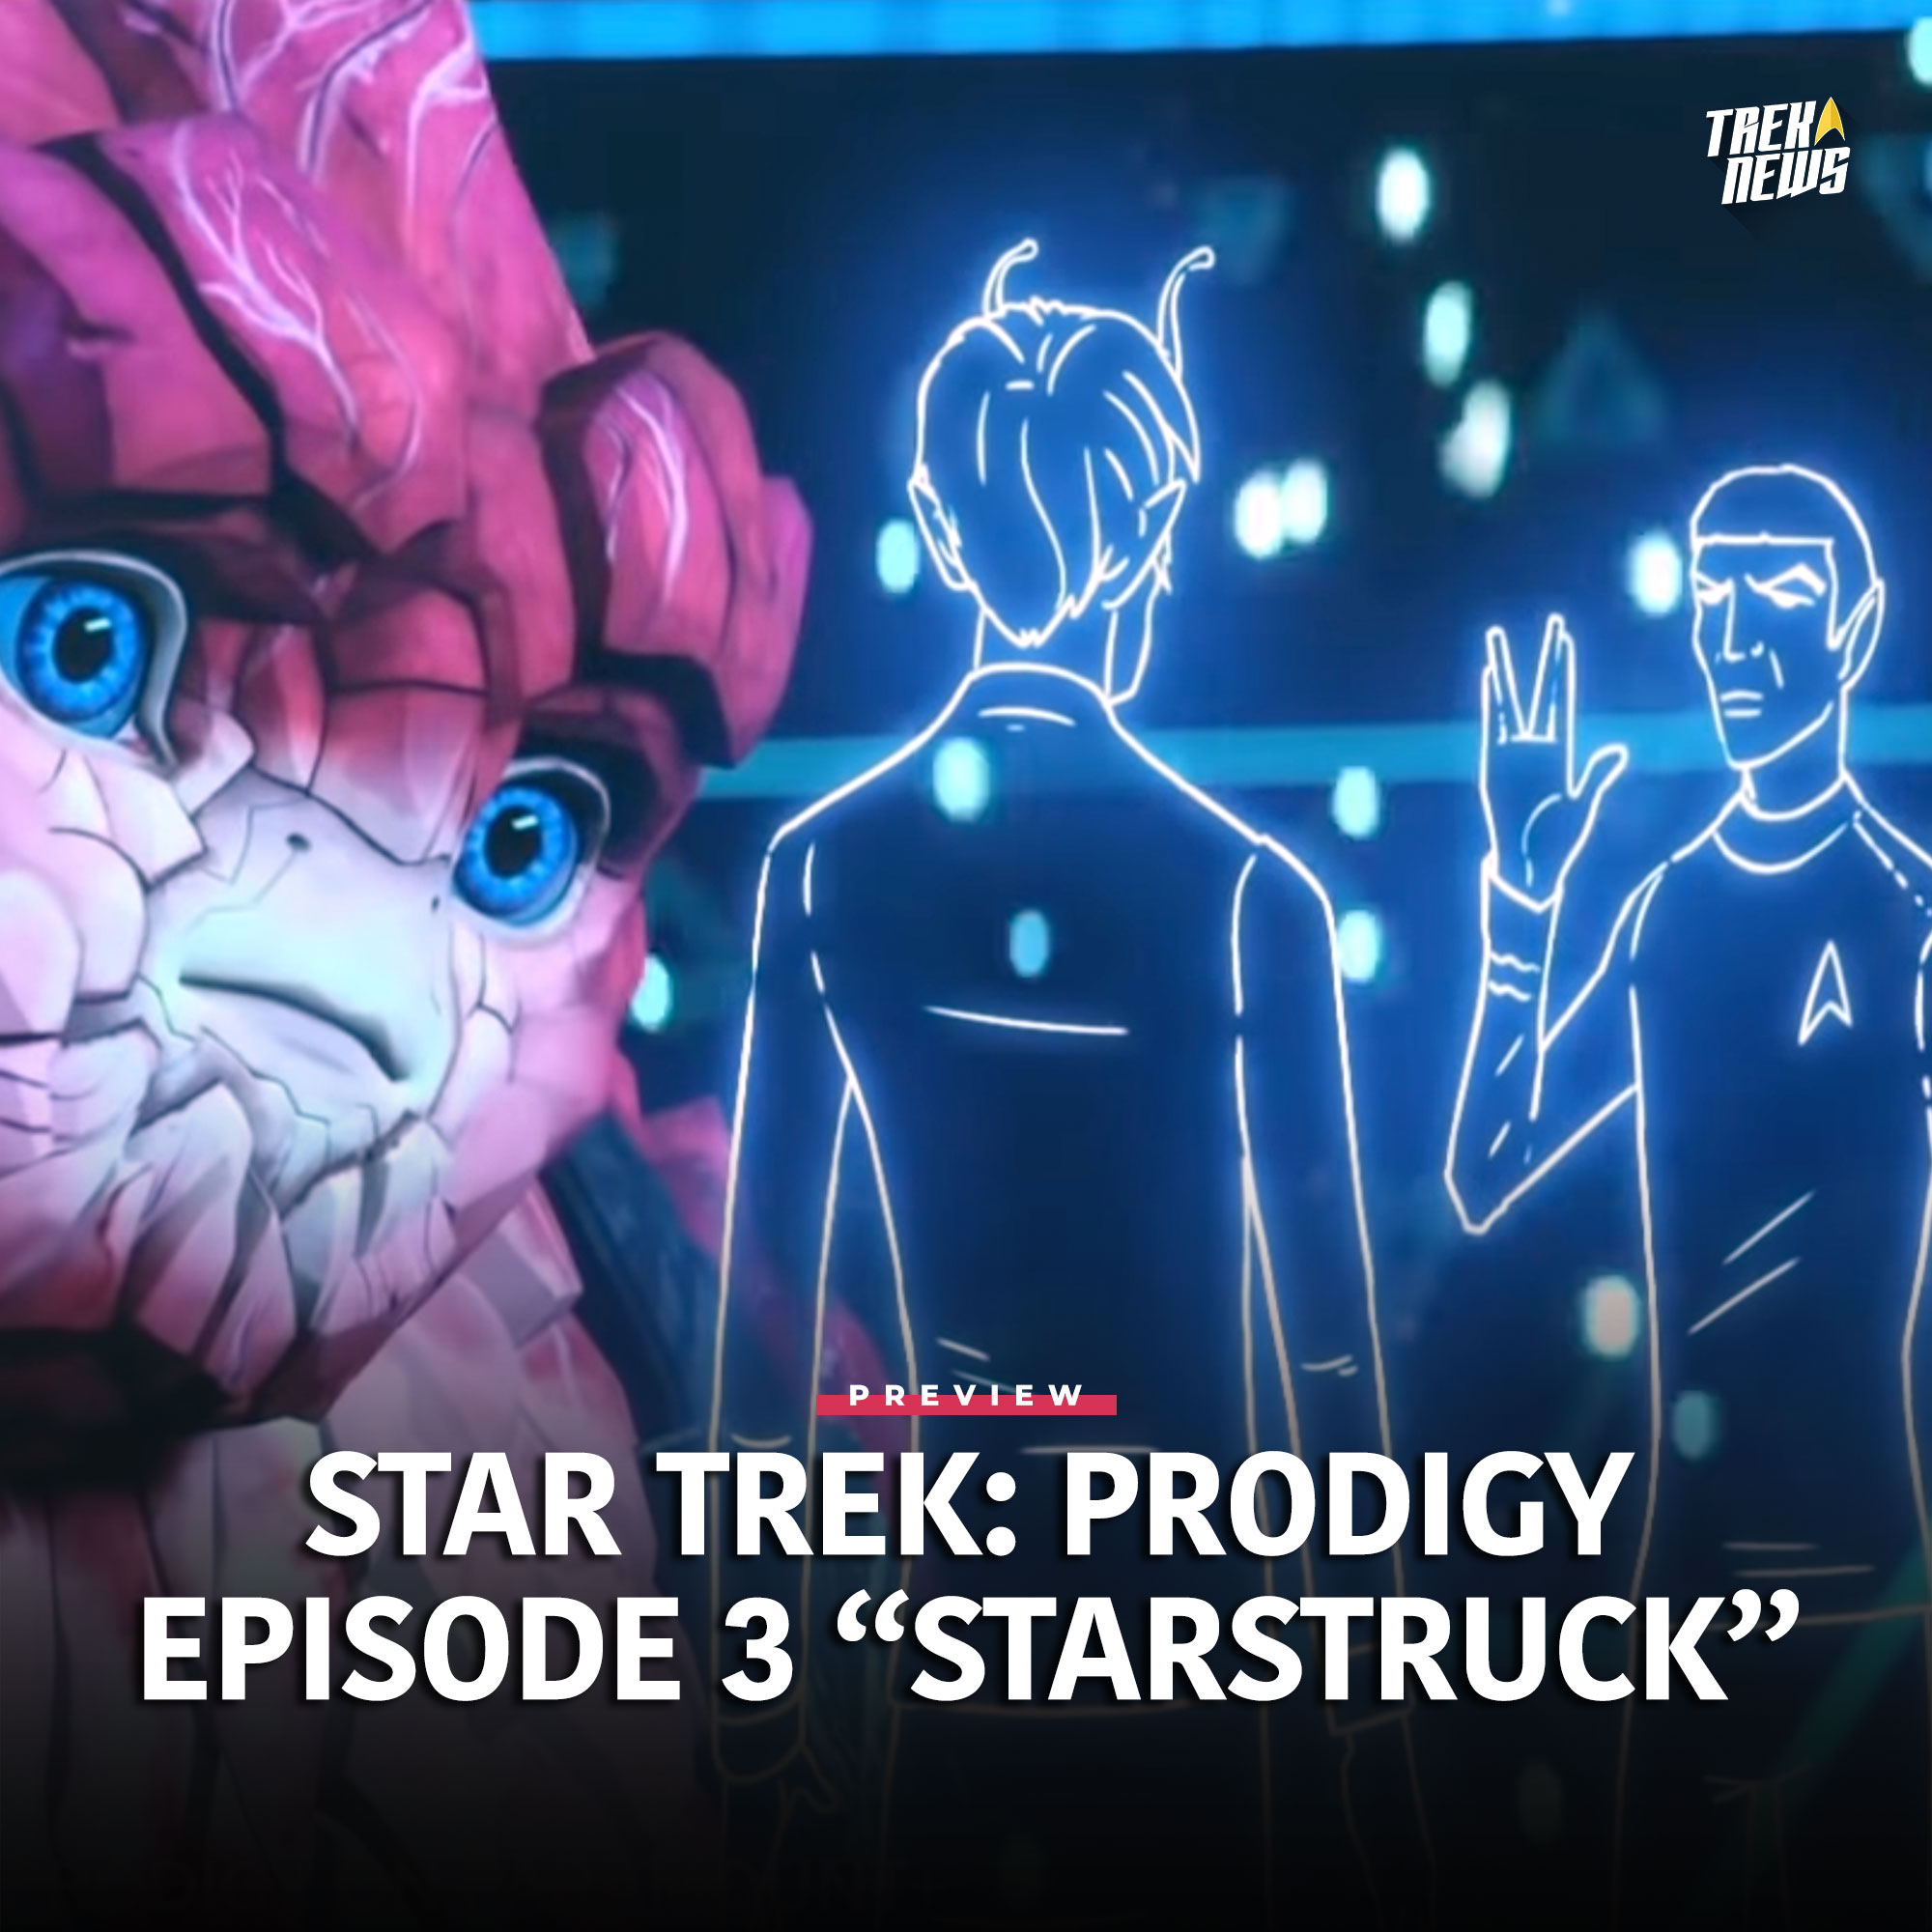 Star Trek: Prodigy Episode 3 “Starstruck” Preview: The Crew Of The USS Protostar Faces Their First Challenge